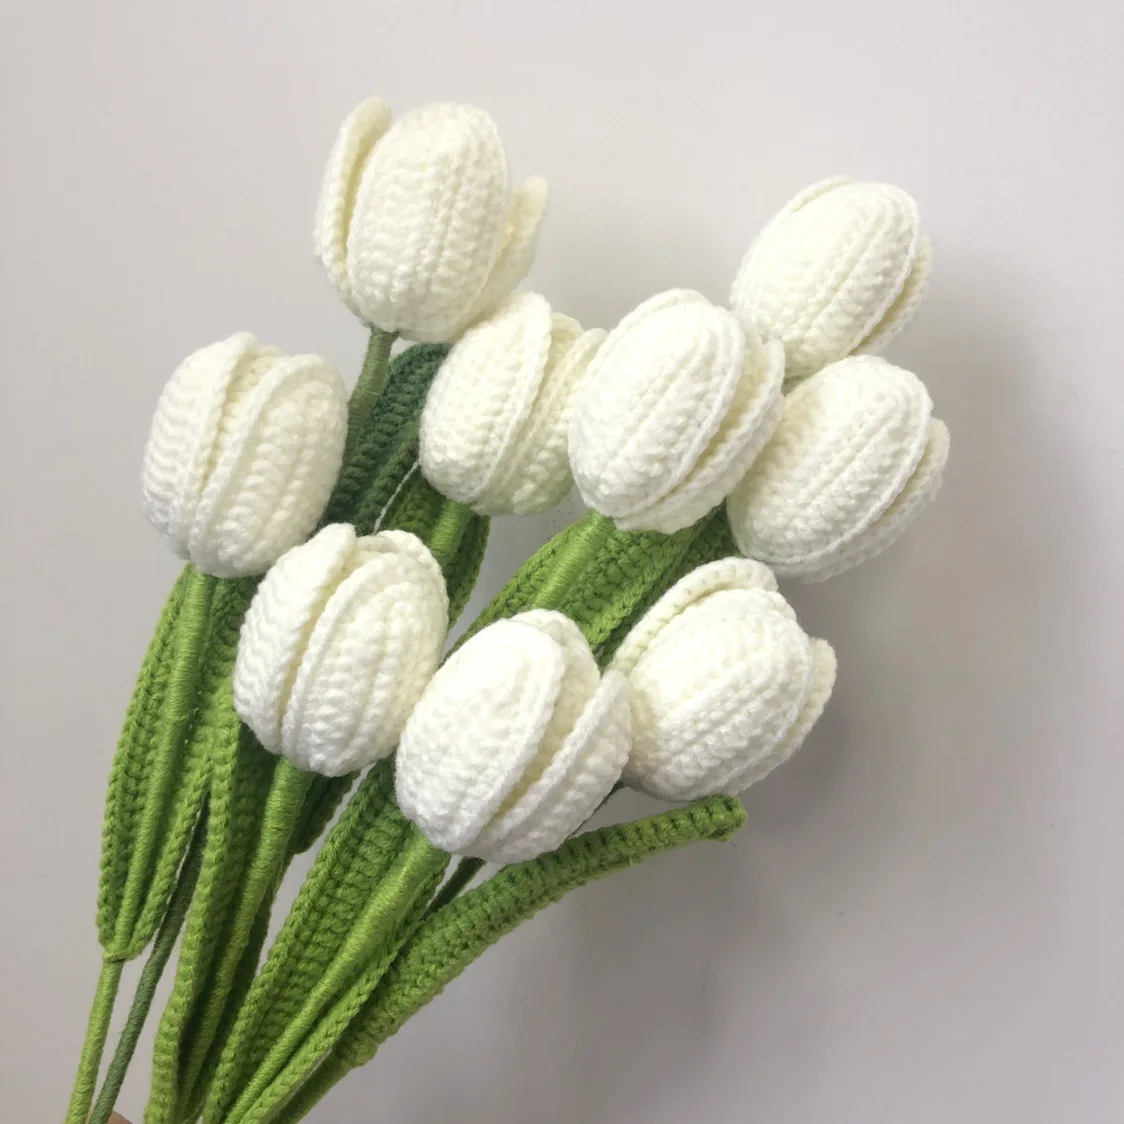 Handmade Knitted Artificial Flowers Tulips For Home Decor Colorful Cotton Yarn Fake Flower For Vase Handmade Mother's Day Gifts